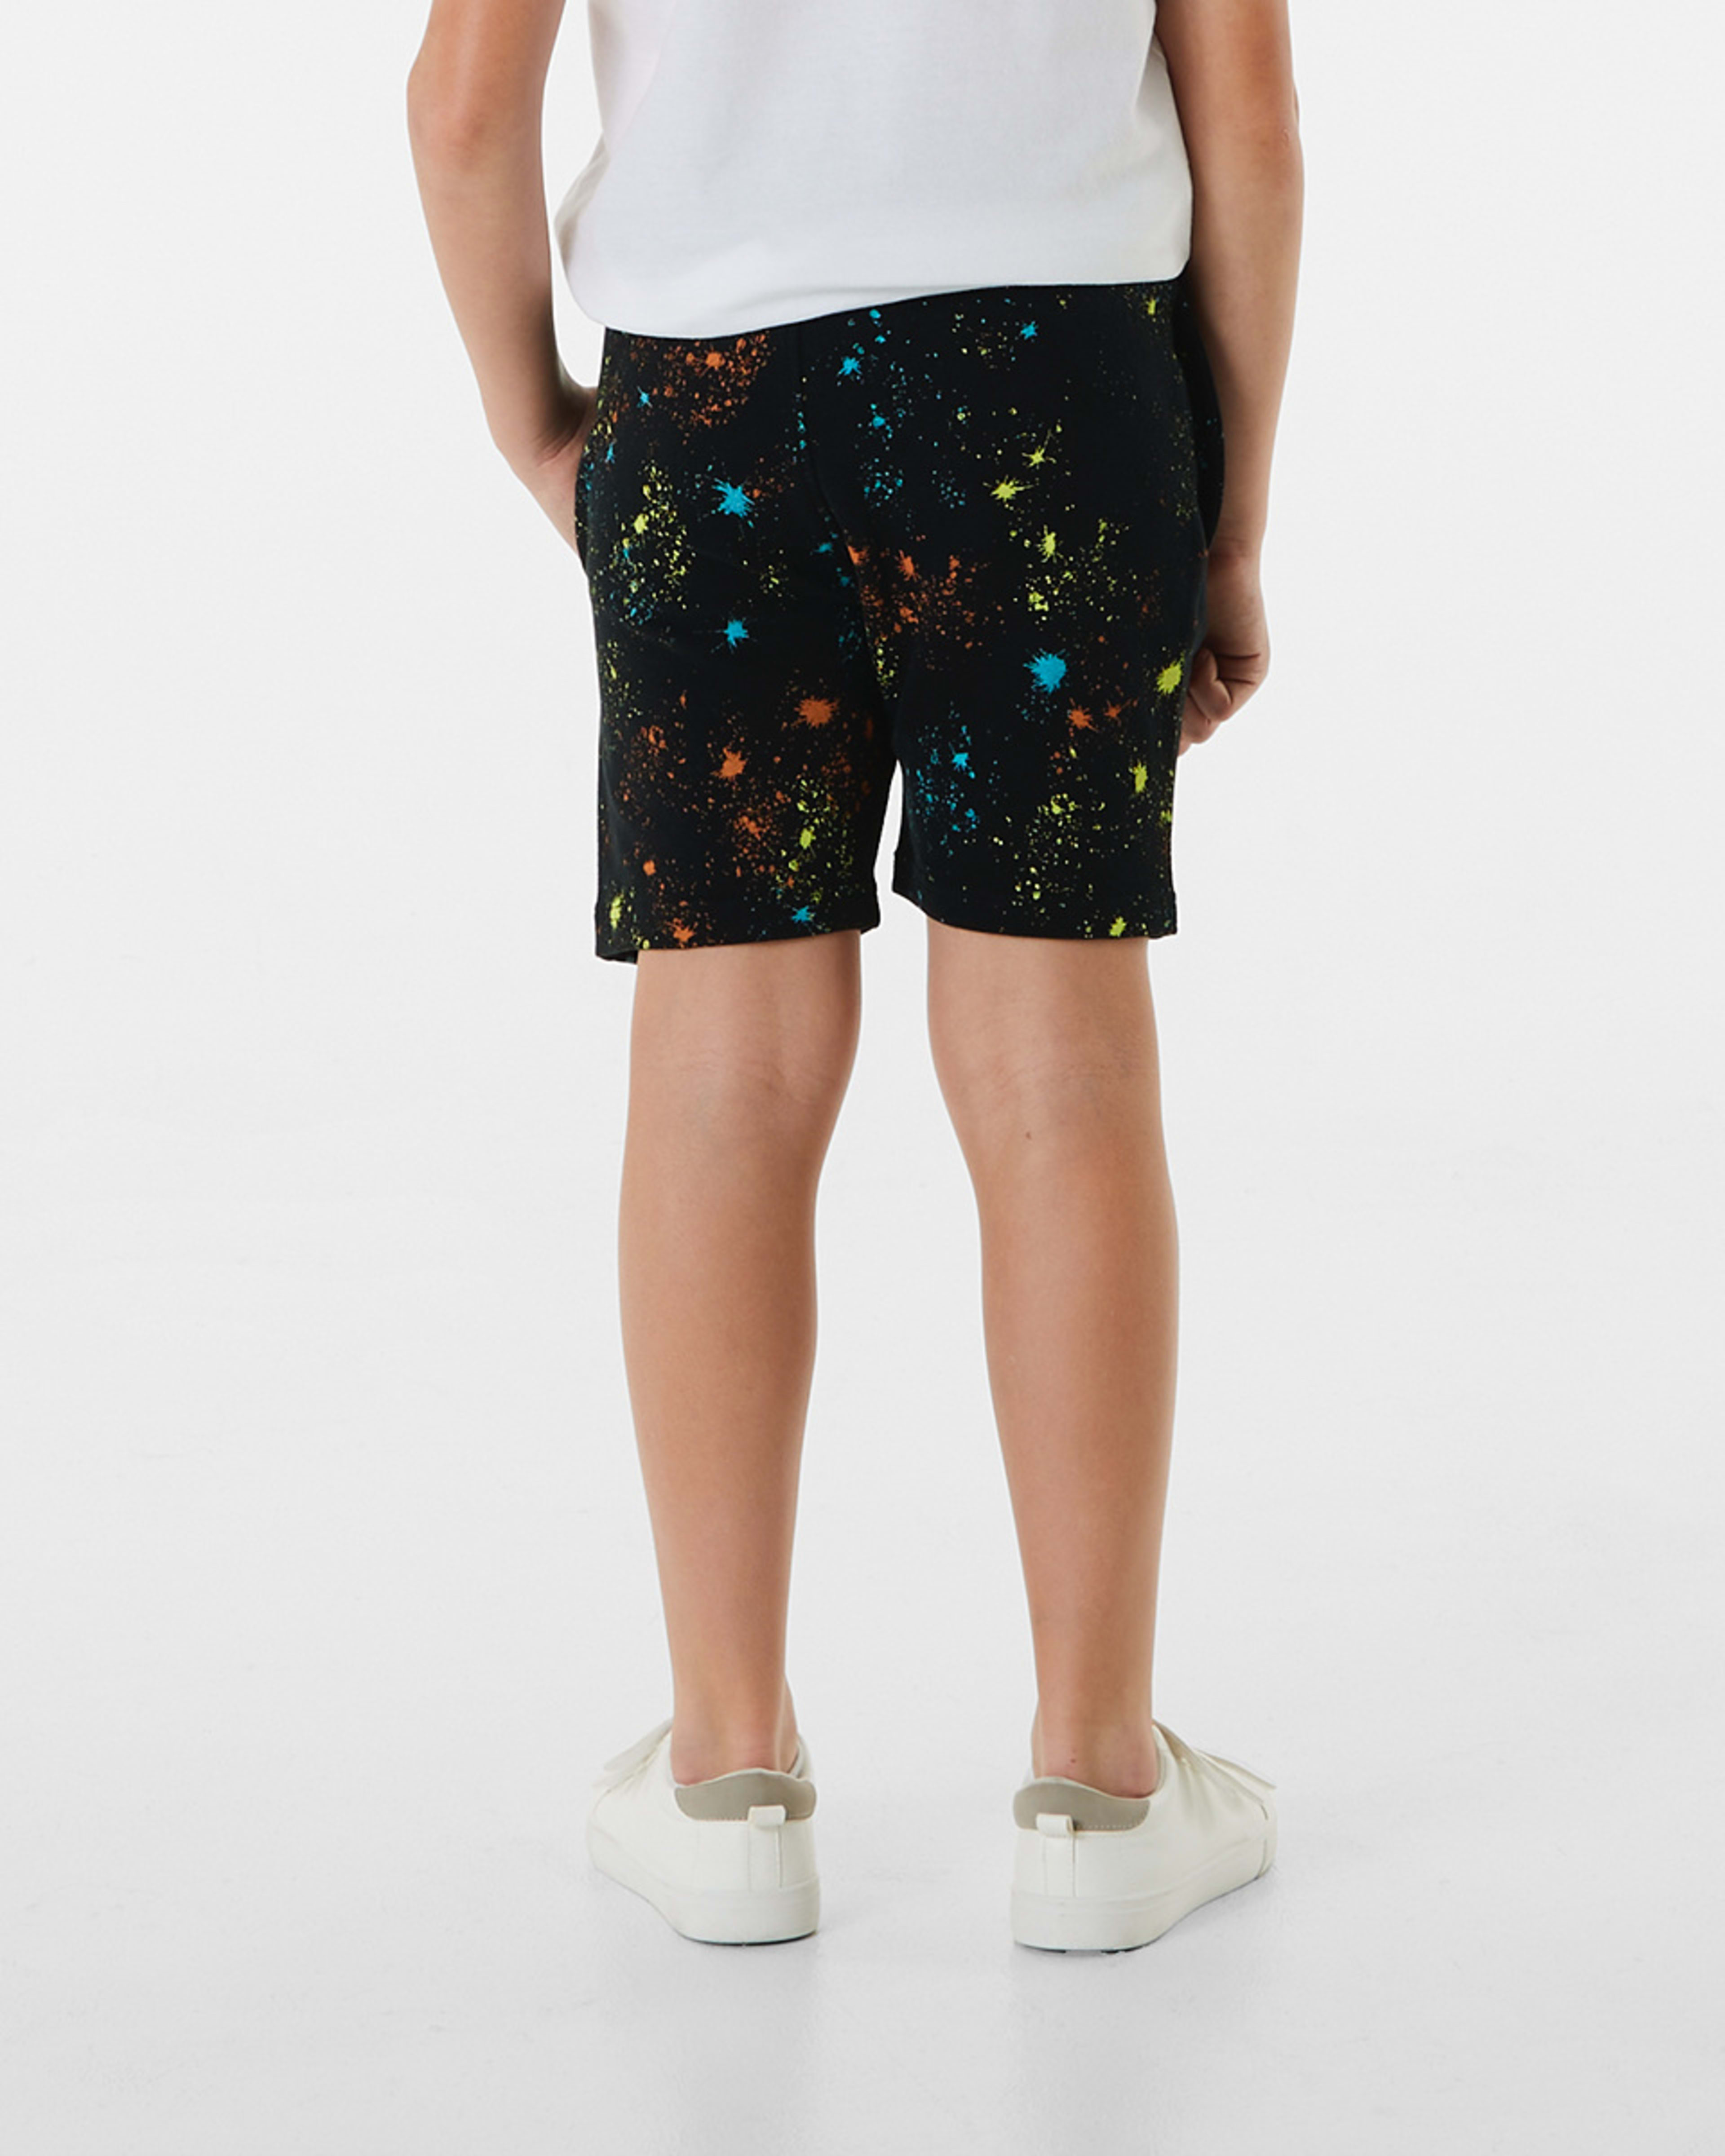 All Over Print Knit Shorts - Kmart